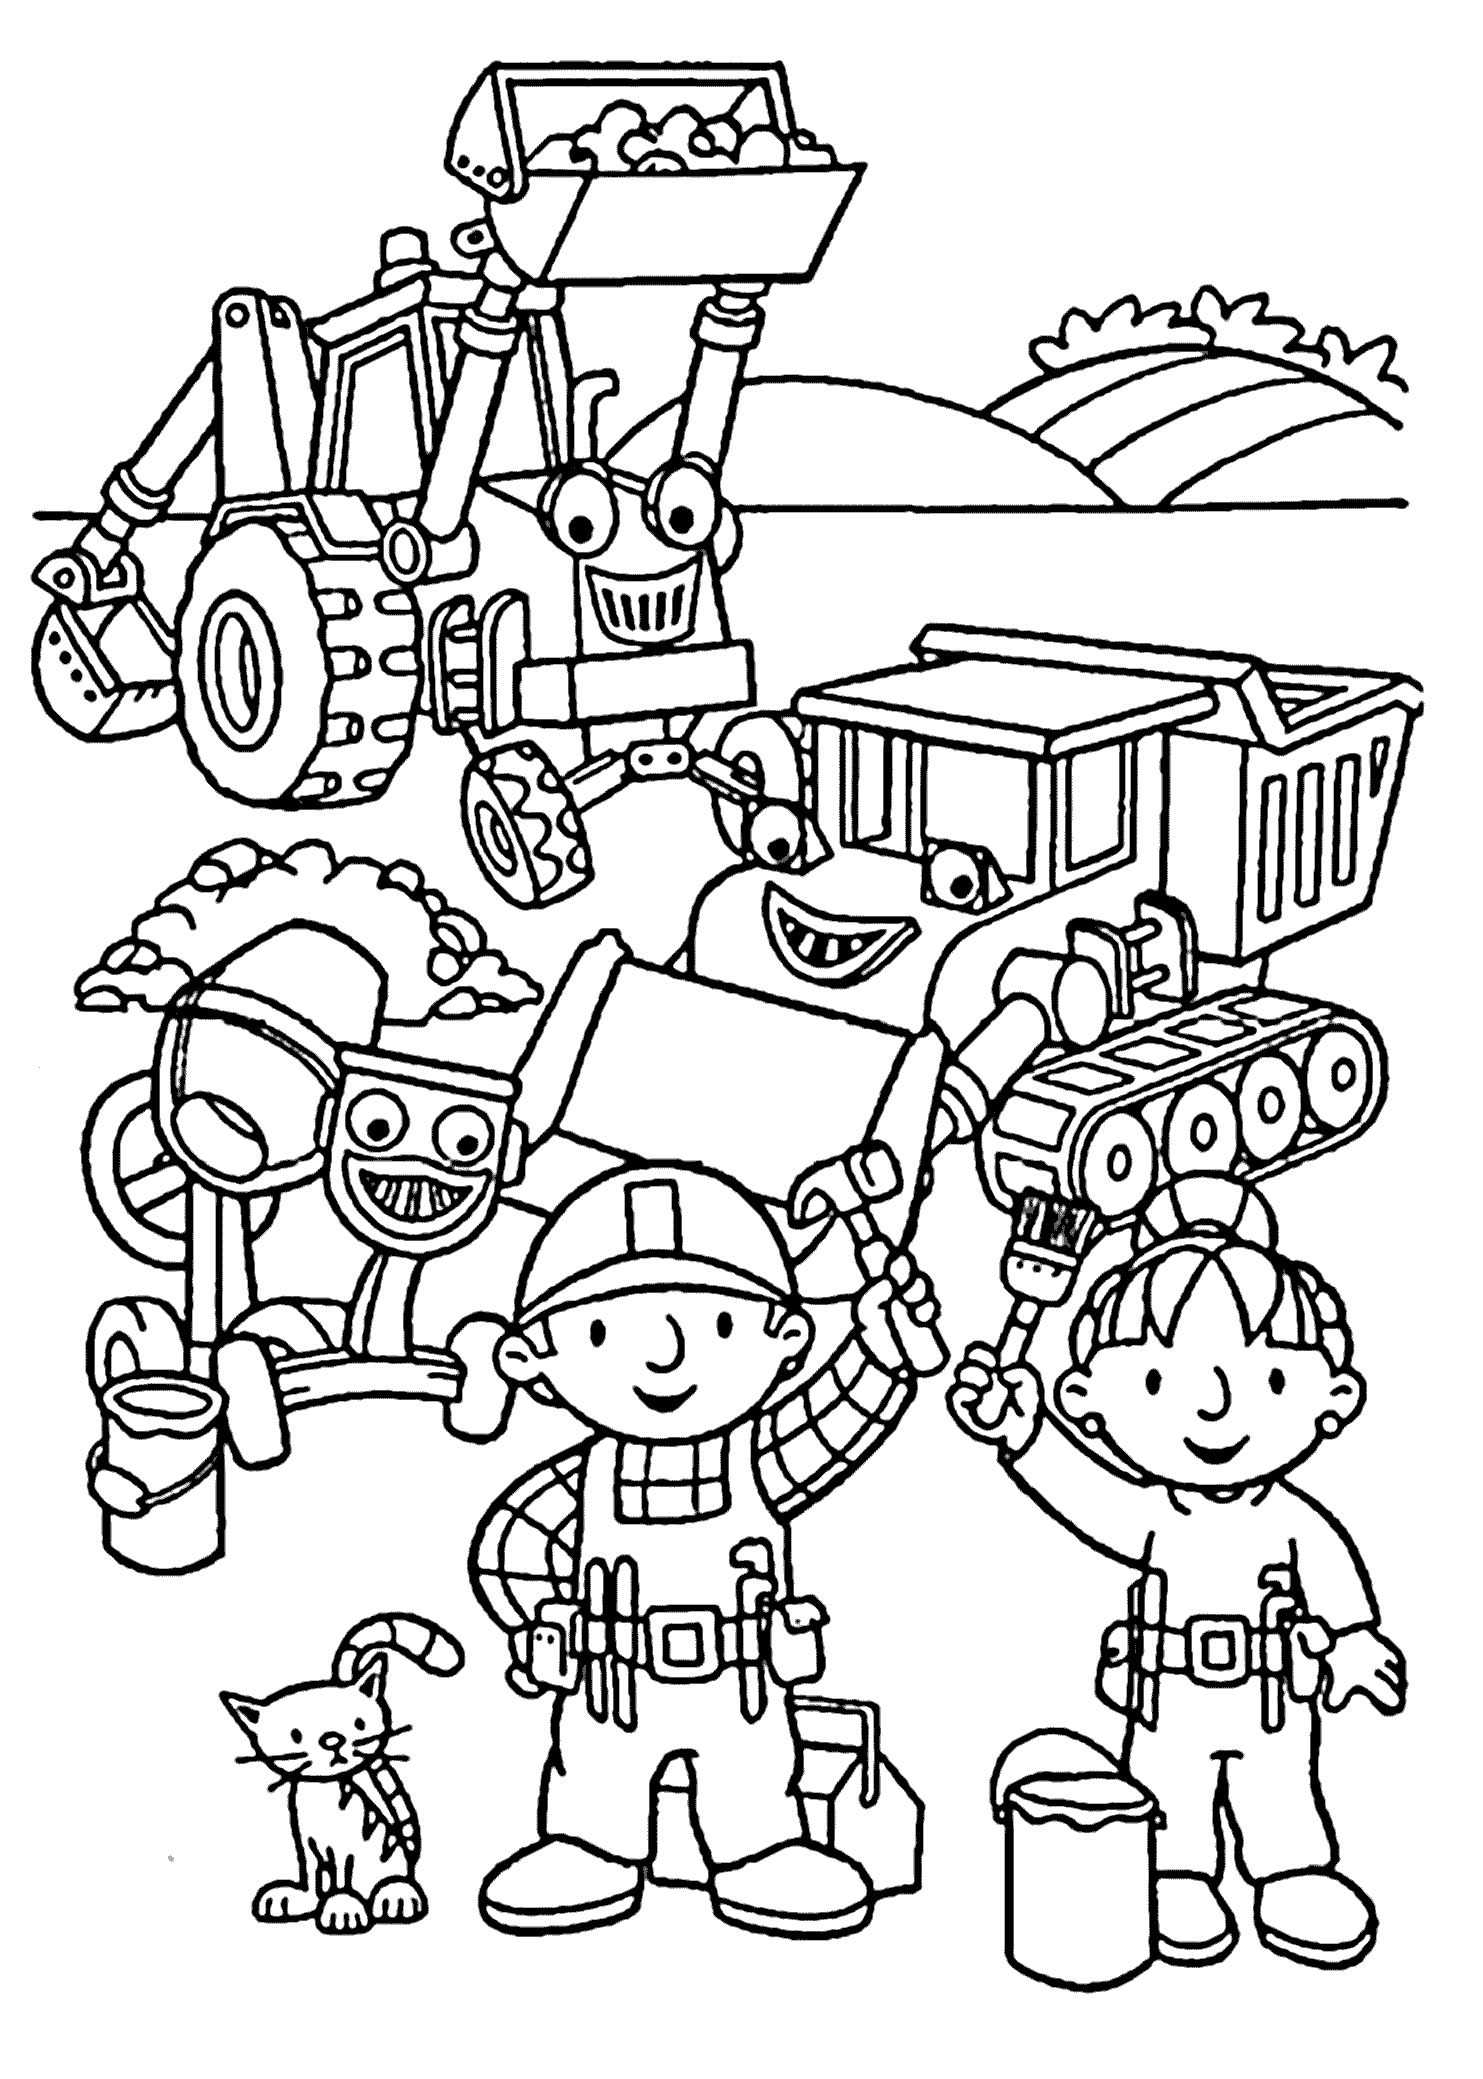 bob the builder with everybody coloring pages